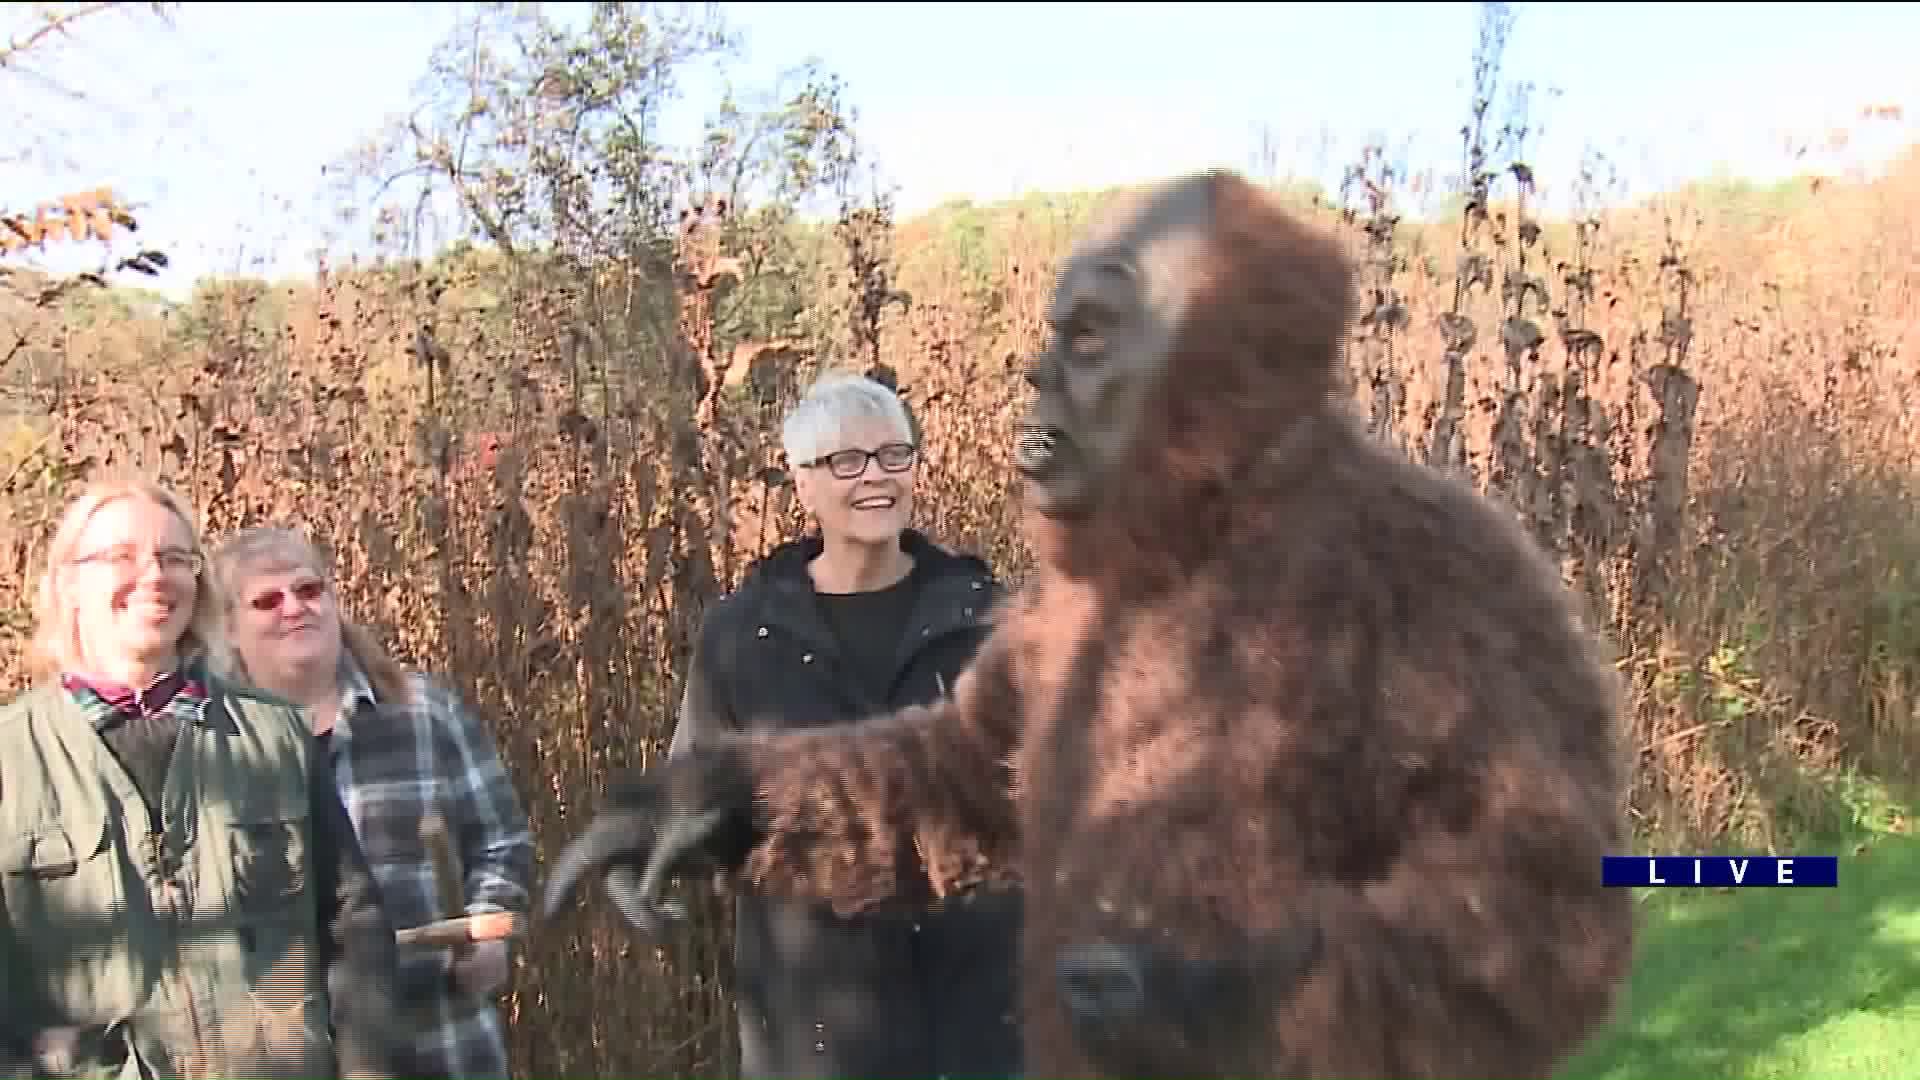 Around Town goes on the lookout for Sasquatch